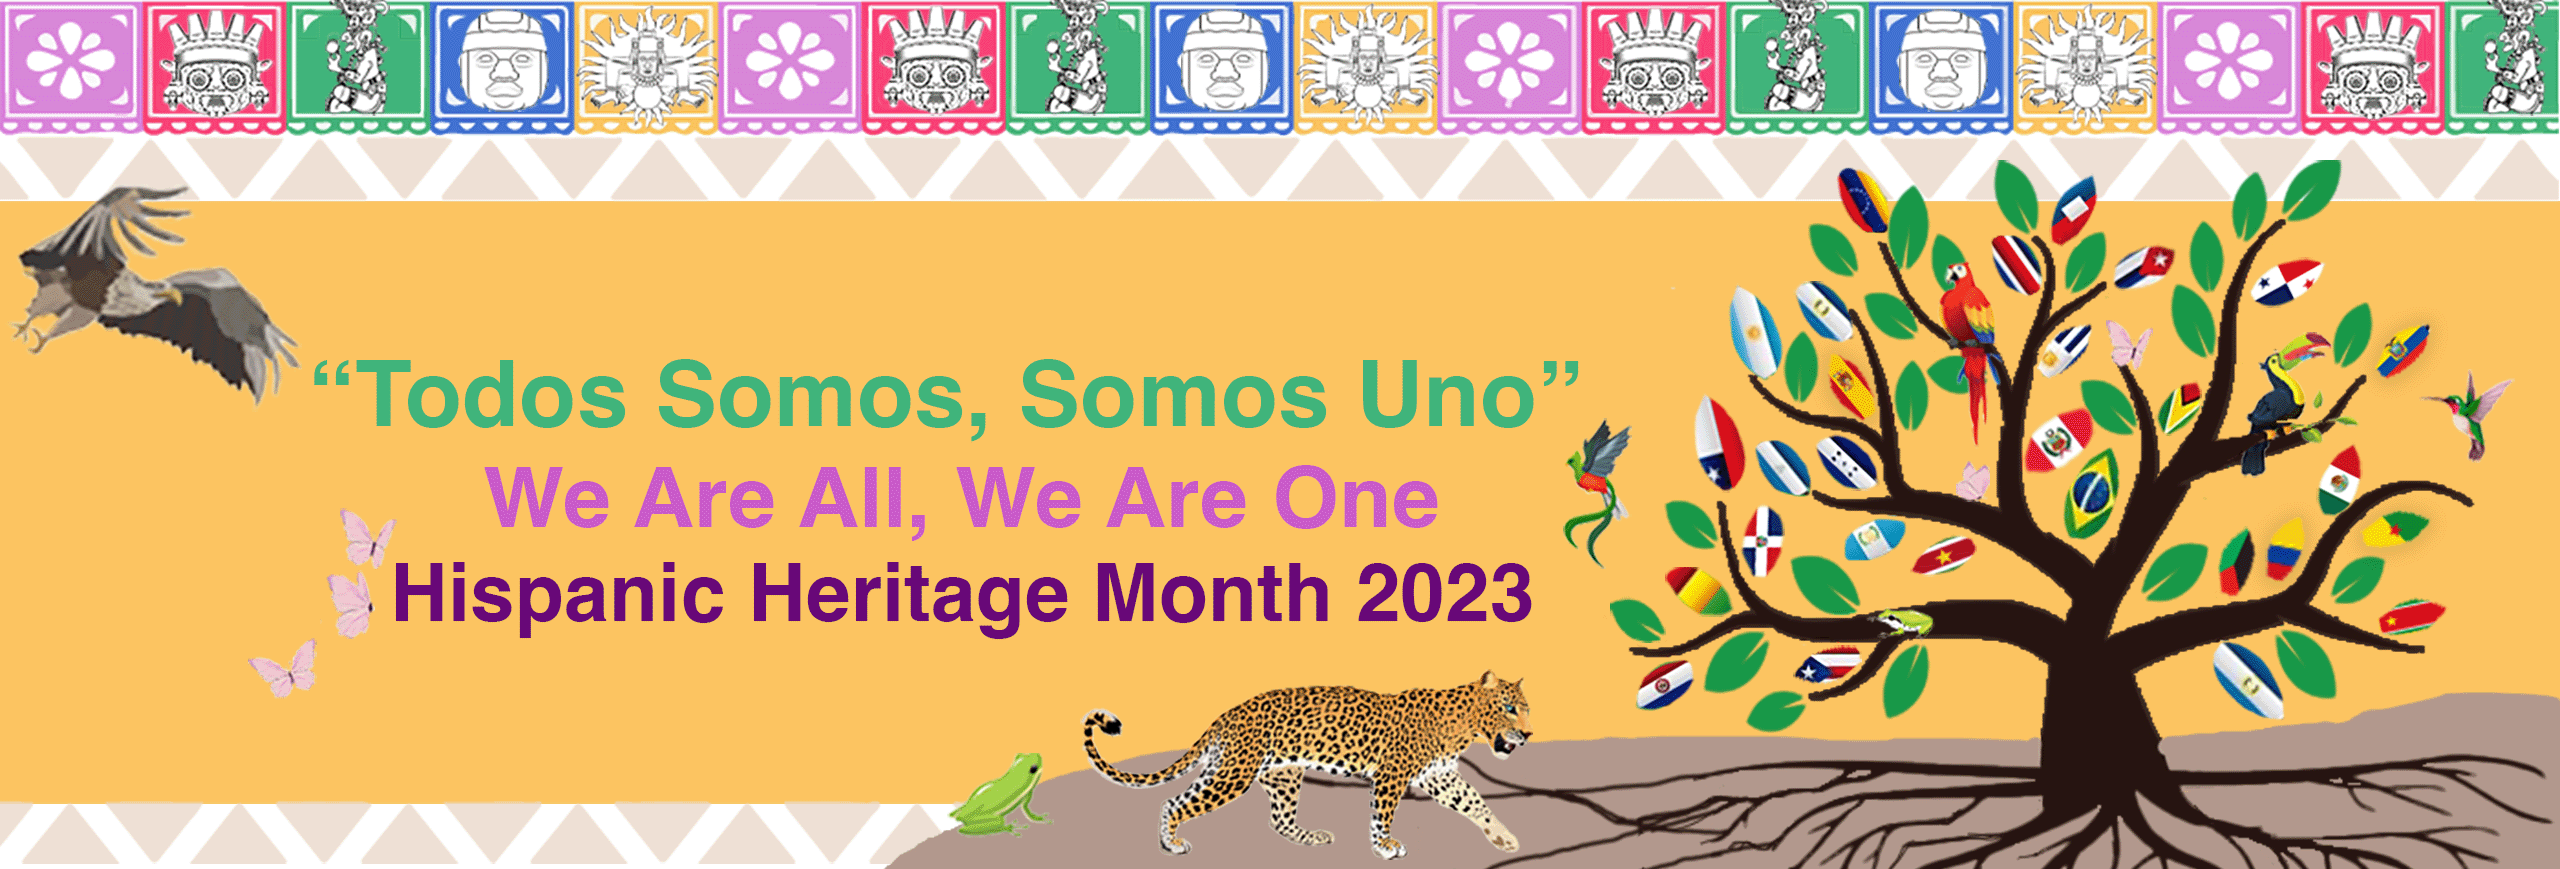 Hispanic Heritage Month 2023  Office of Equity, Diversity, and